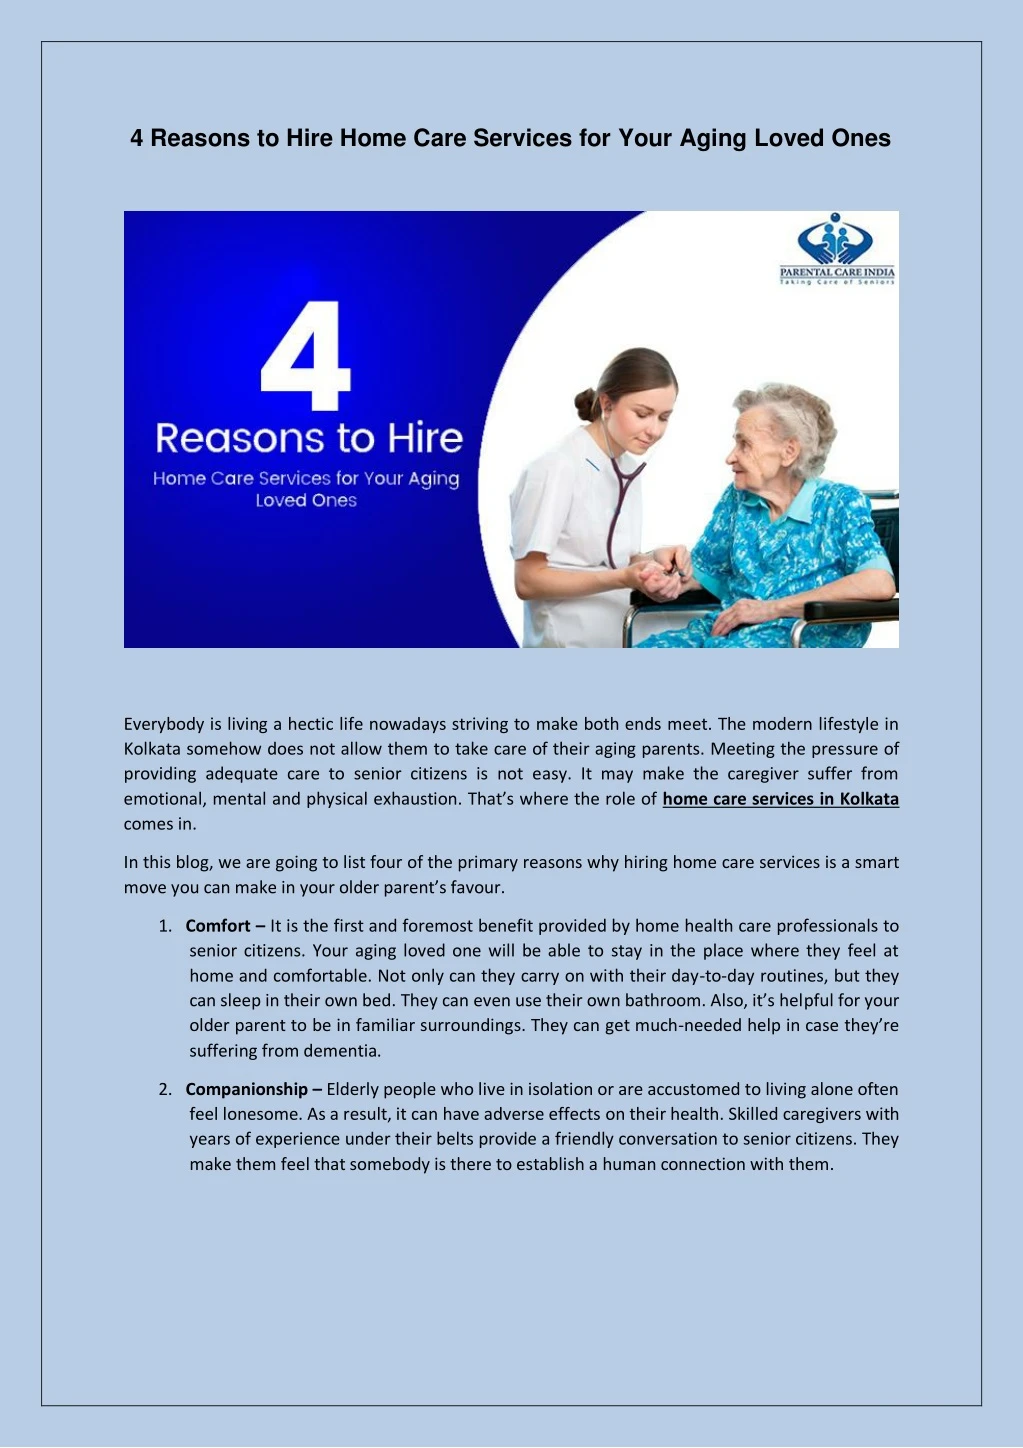 4 reasons to hire home care services for your